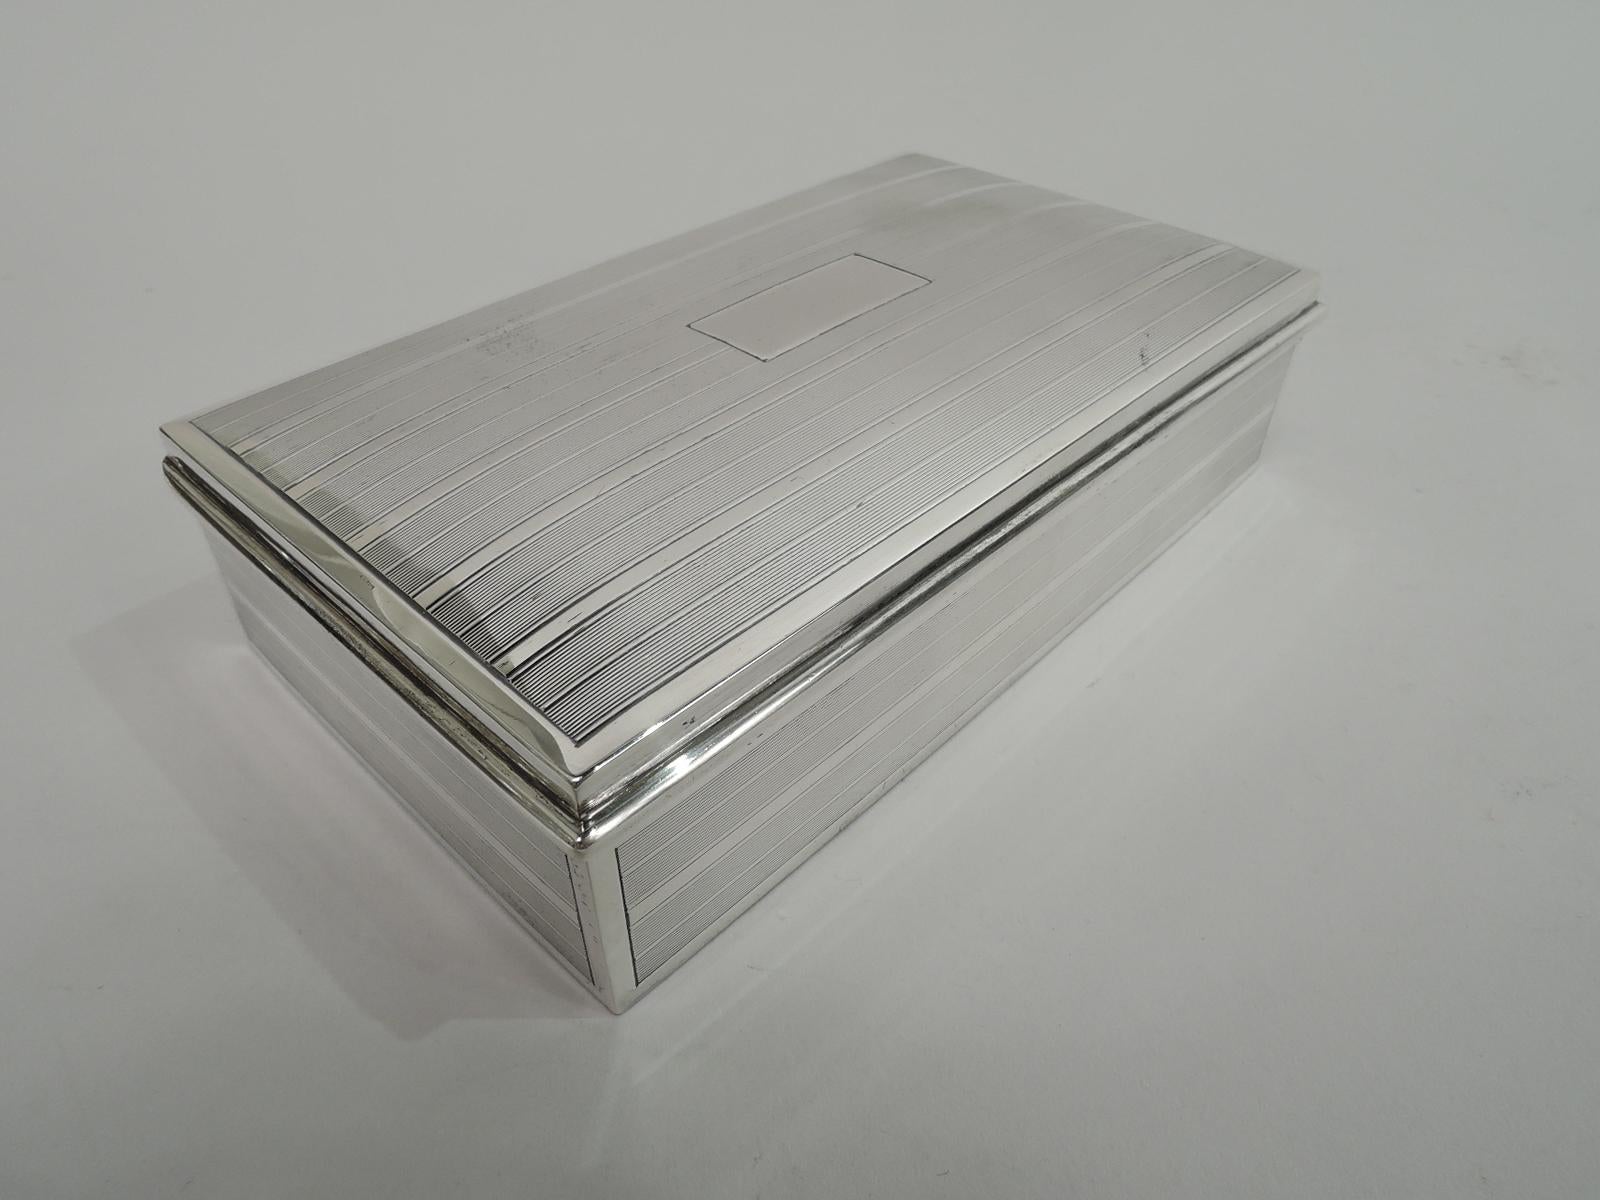 Modern sterling silver box. Made by Andrew A. Taylor in Newark, ca 1940. Rectangular with straight sides and crisp corners. Cover hinged with gently curved top and wraparound molded rim. Engine turned horizontal lines in plain frames on box sides